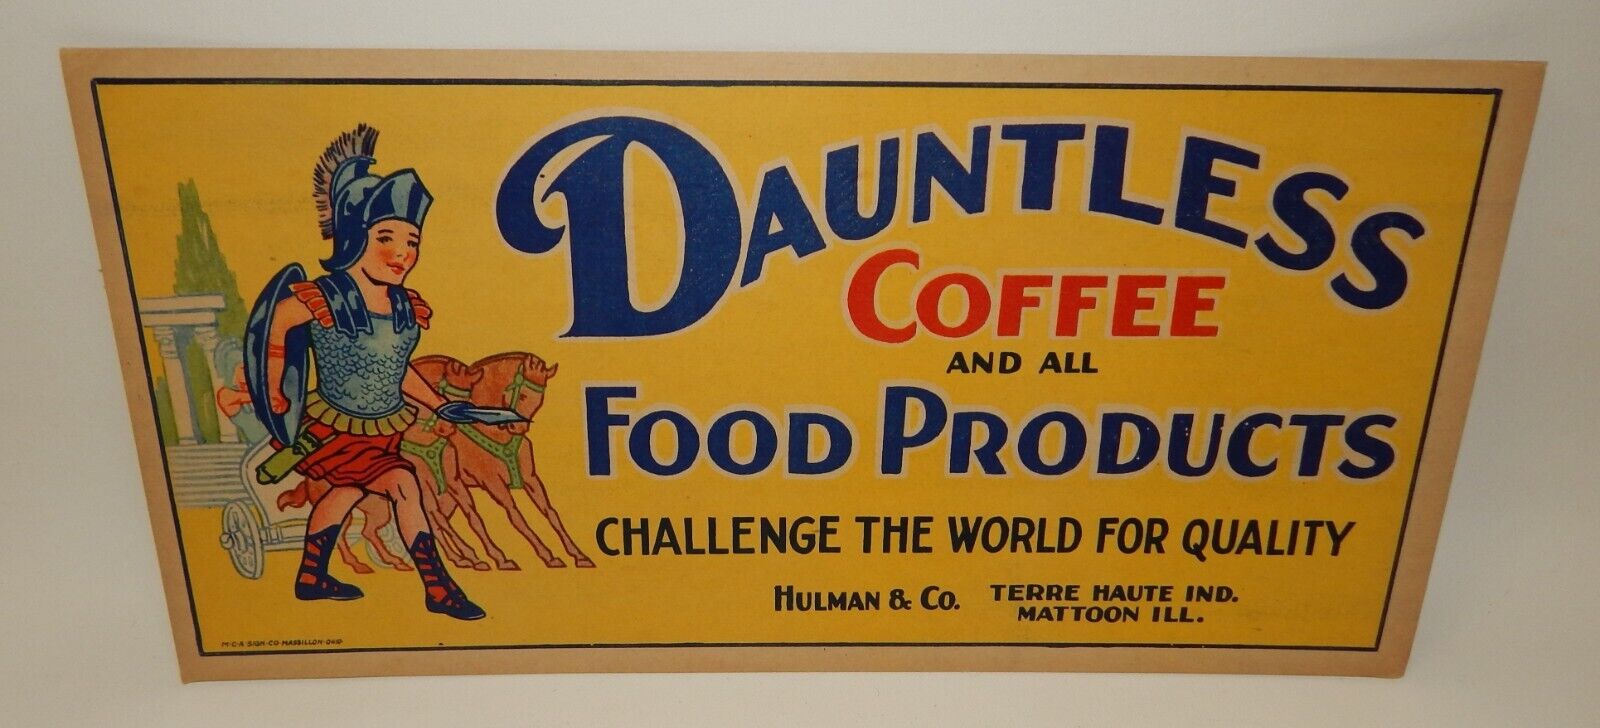 Vtg Dauntless Coffee & Food Products Hullman & Co. Terre Haute IN Advertising